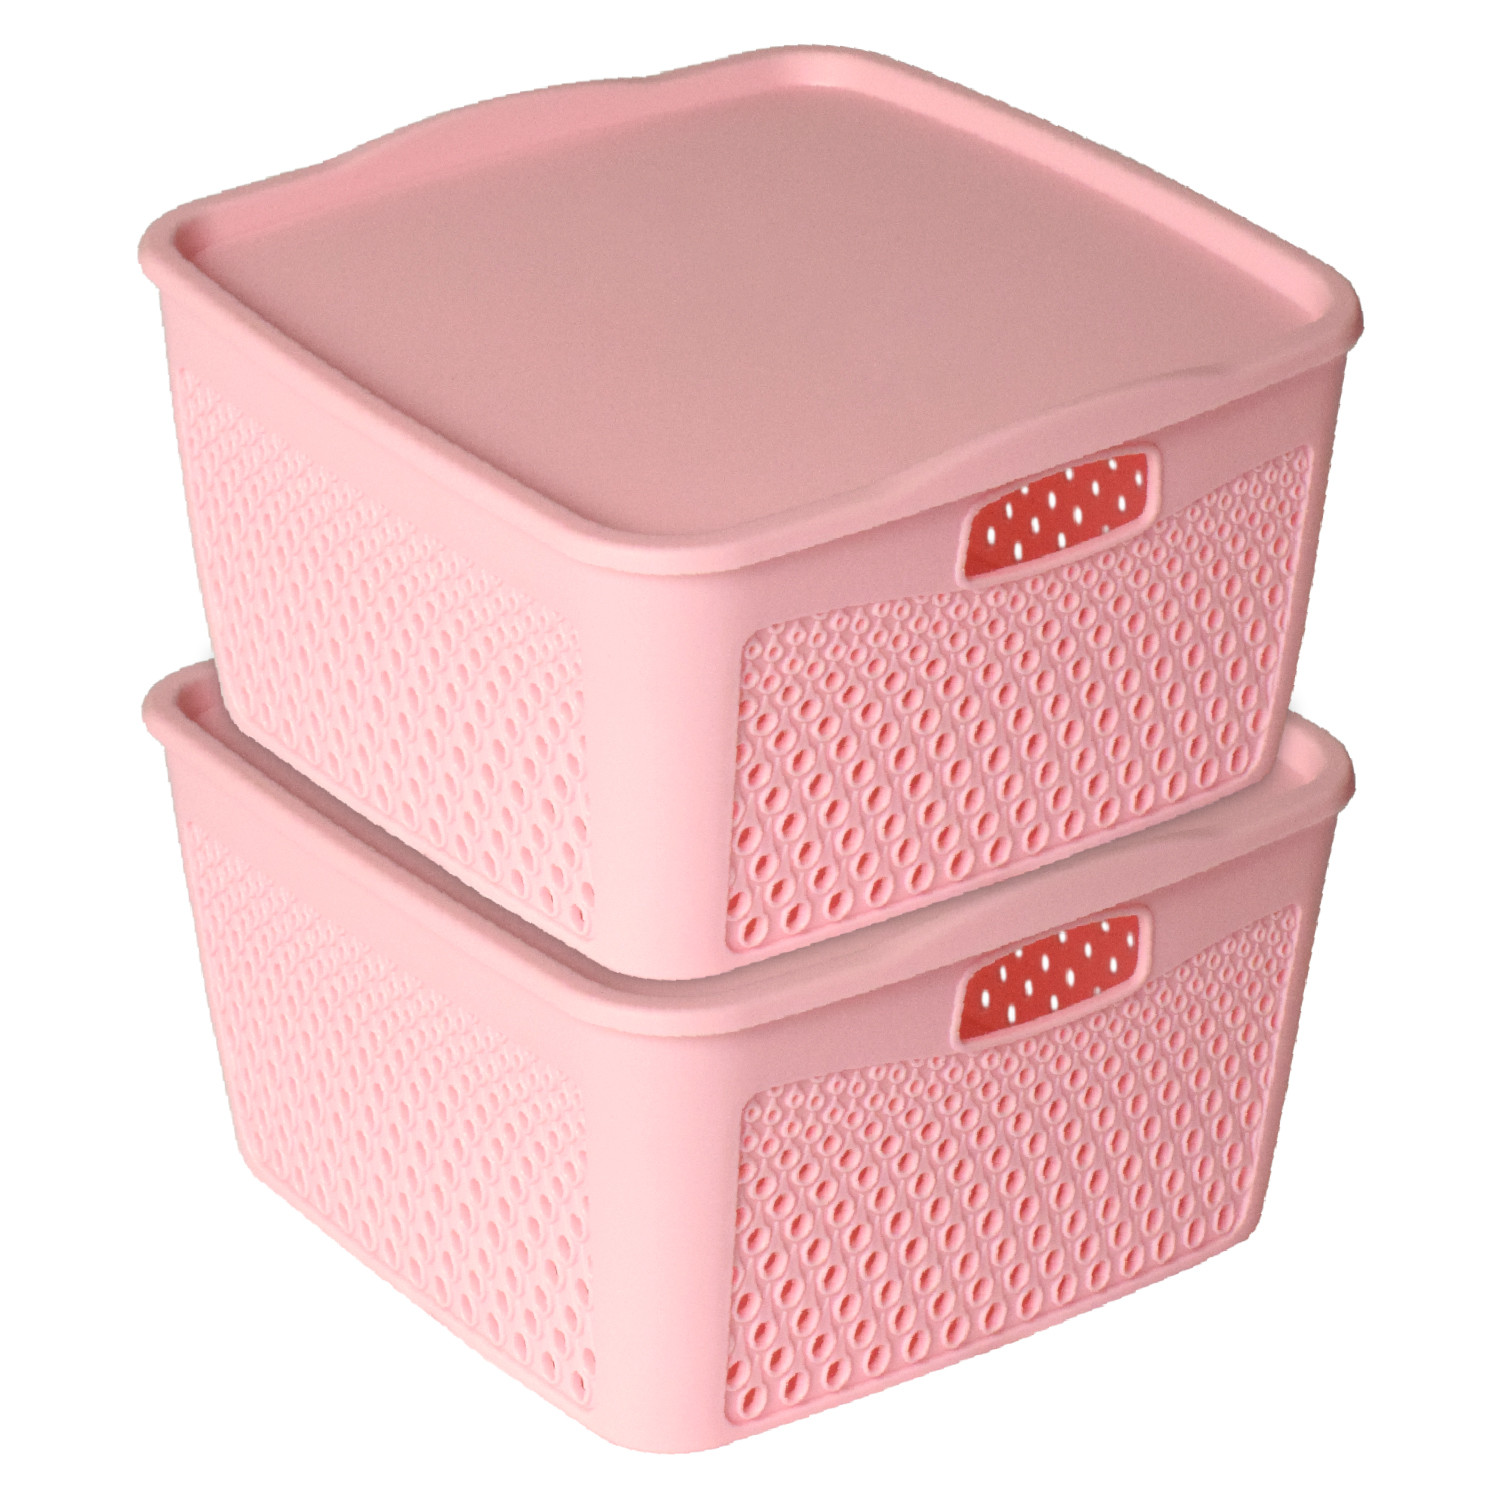 Kuber Industries Netted Design Unbreakable Multipurpose Square Shape Plastic Storage Baskets with lid Small (Pink)